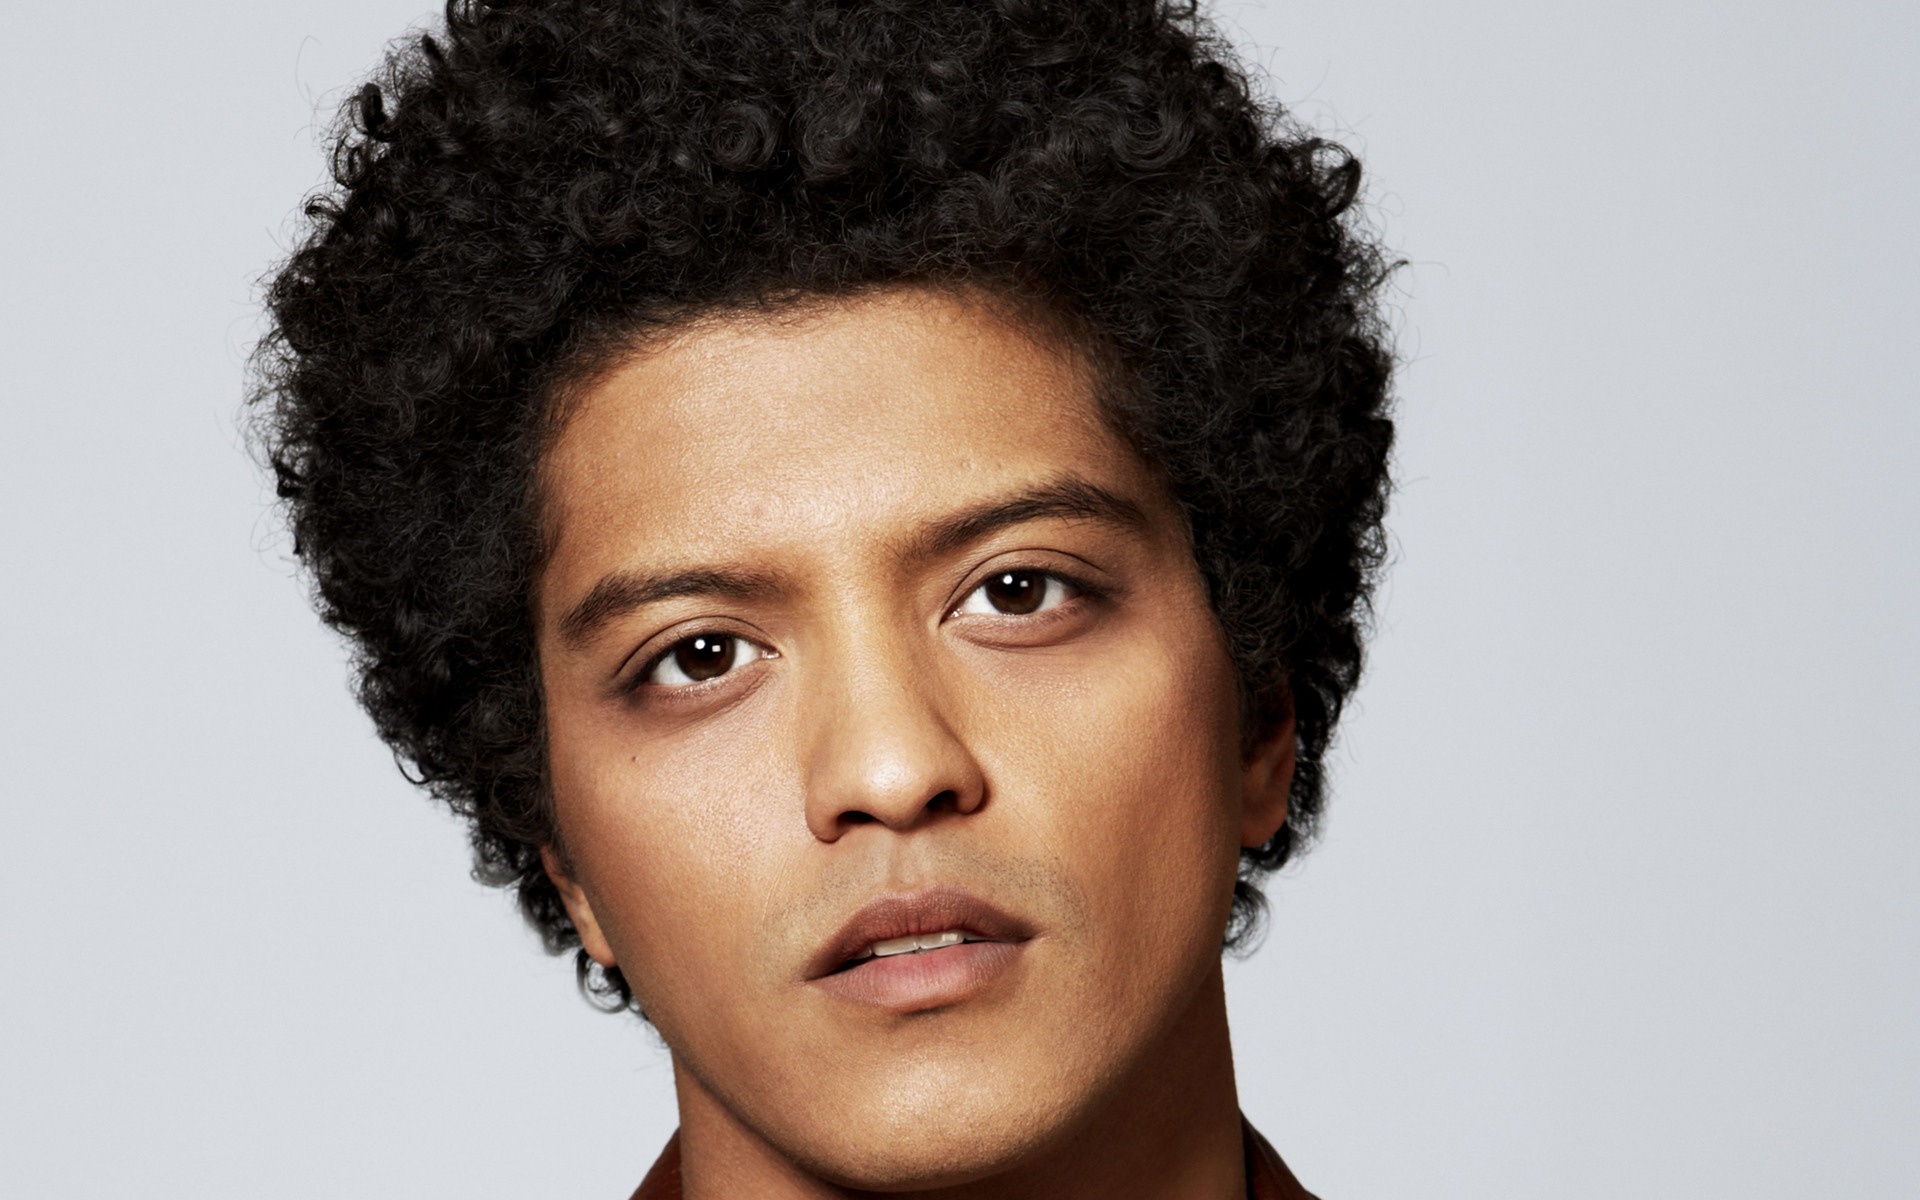 Bruno Mars HD wallpapers, Baltana collection, Quality images, High resolution, 1920x1200 HD Desktop